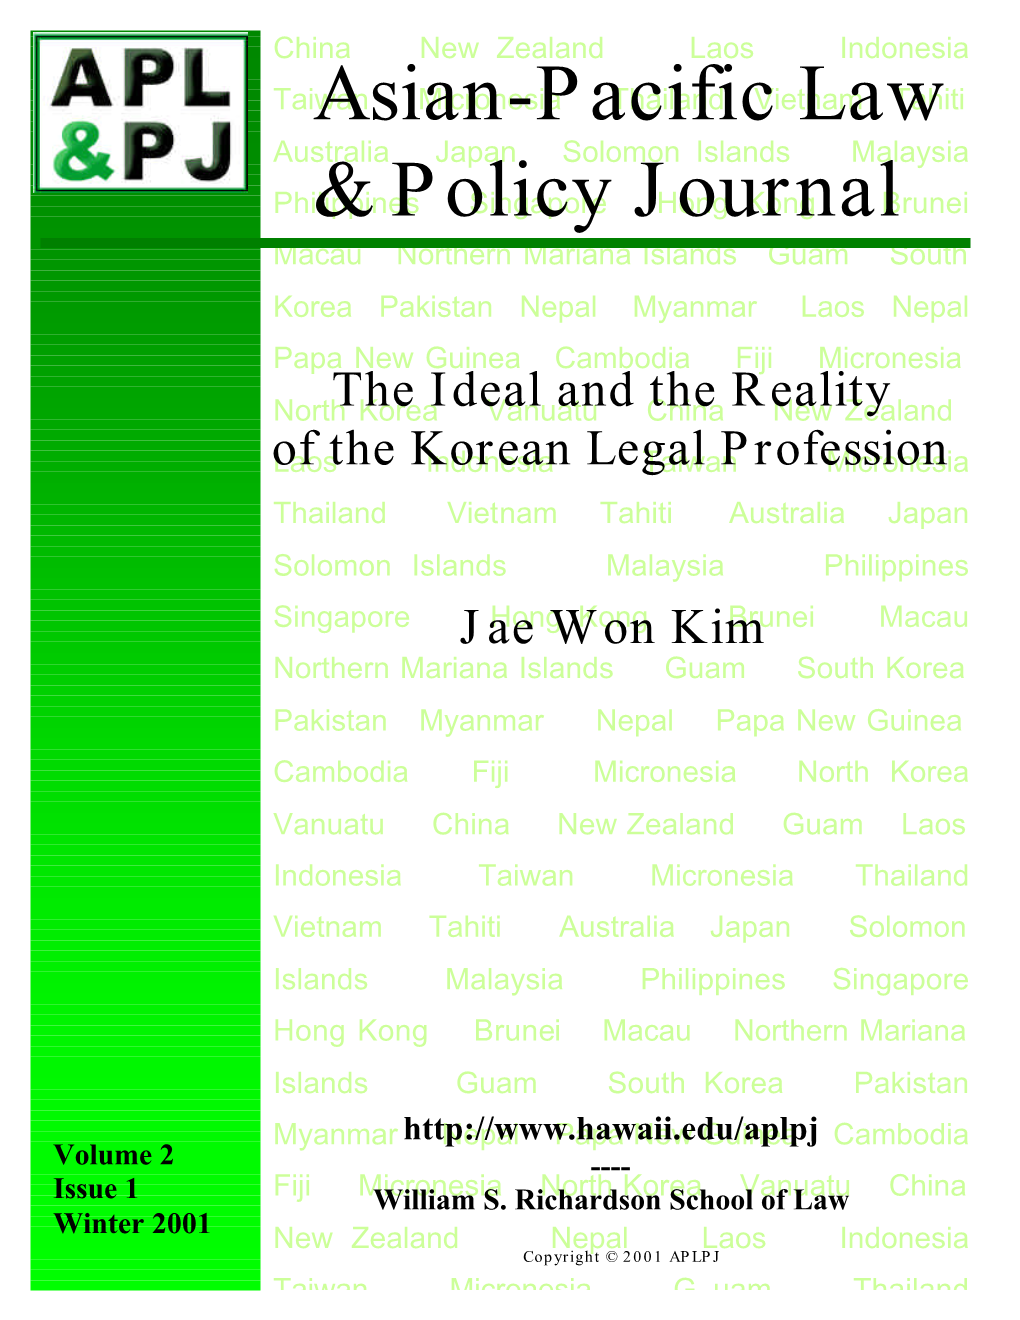 The Ideal and the Reality of the Korean Legal Profession